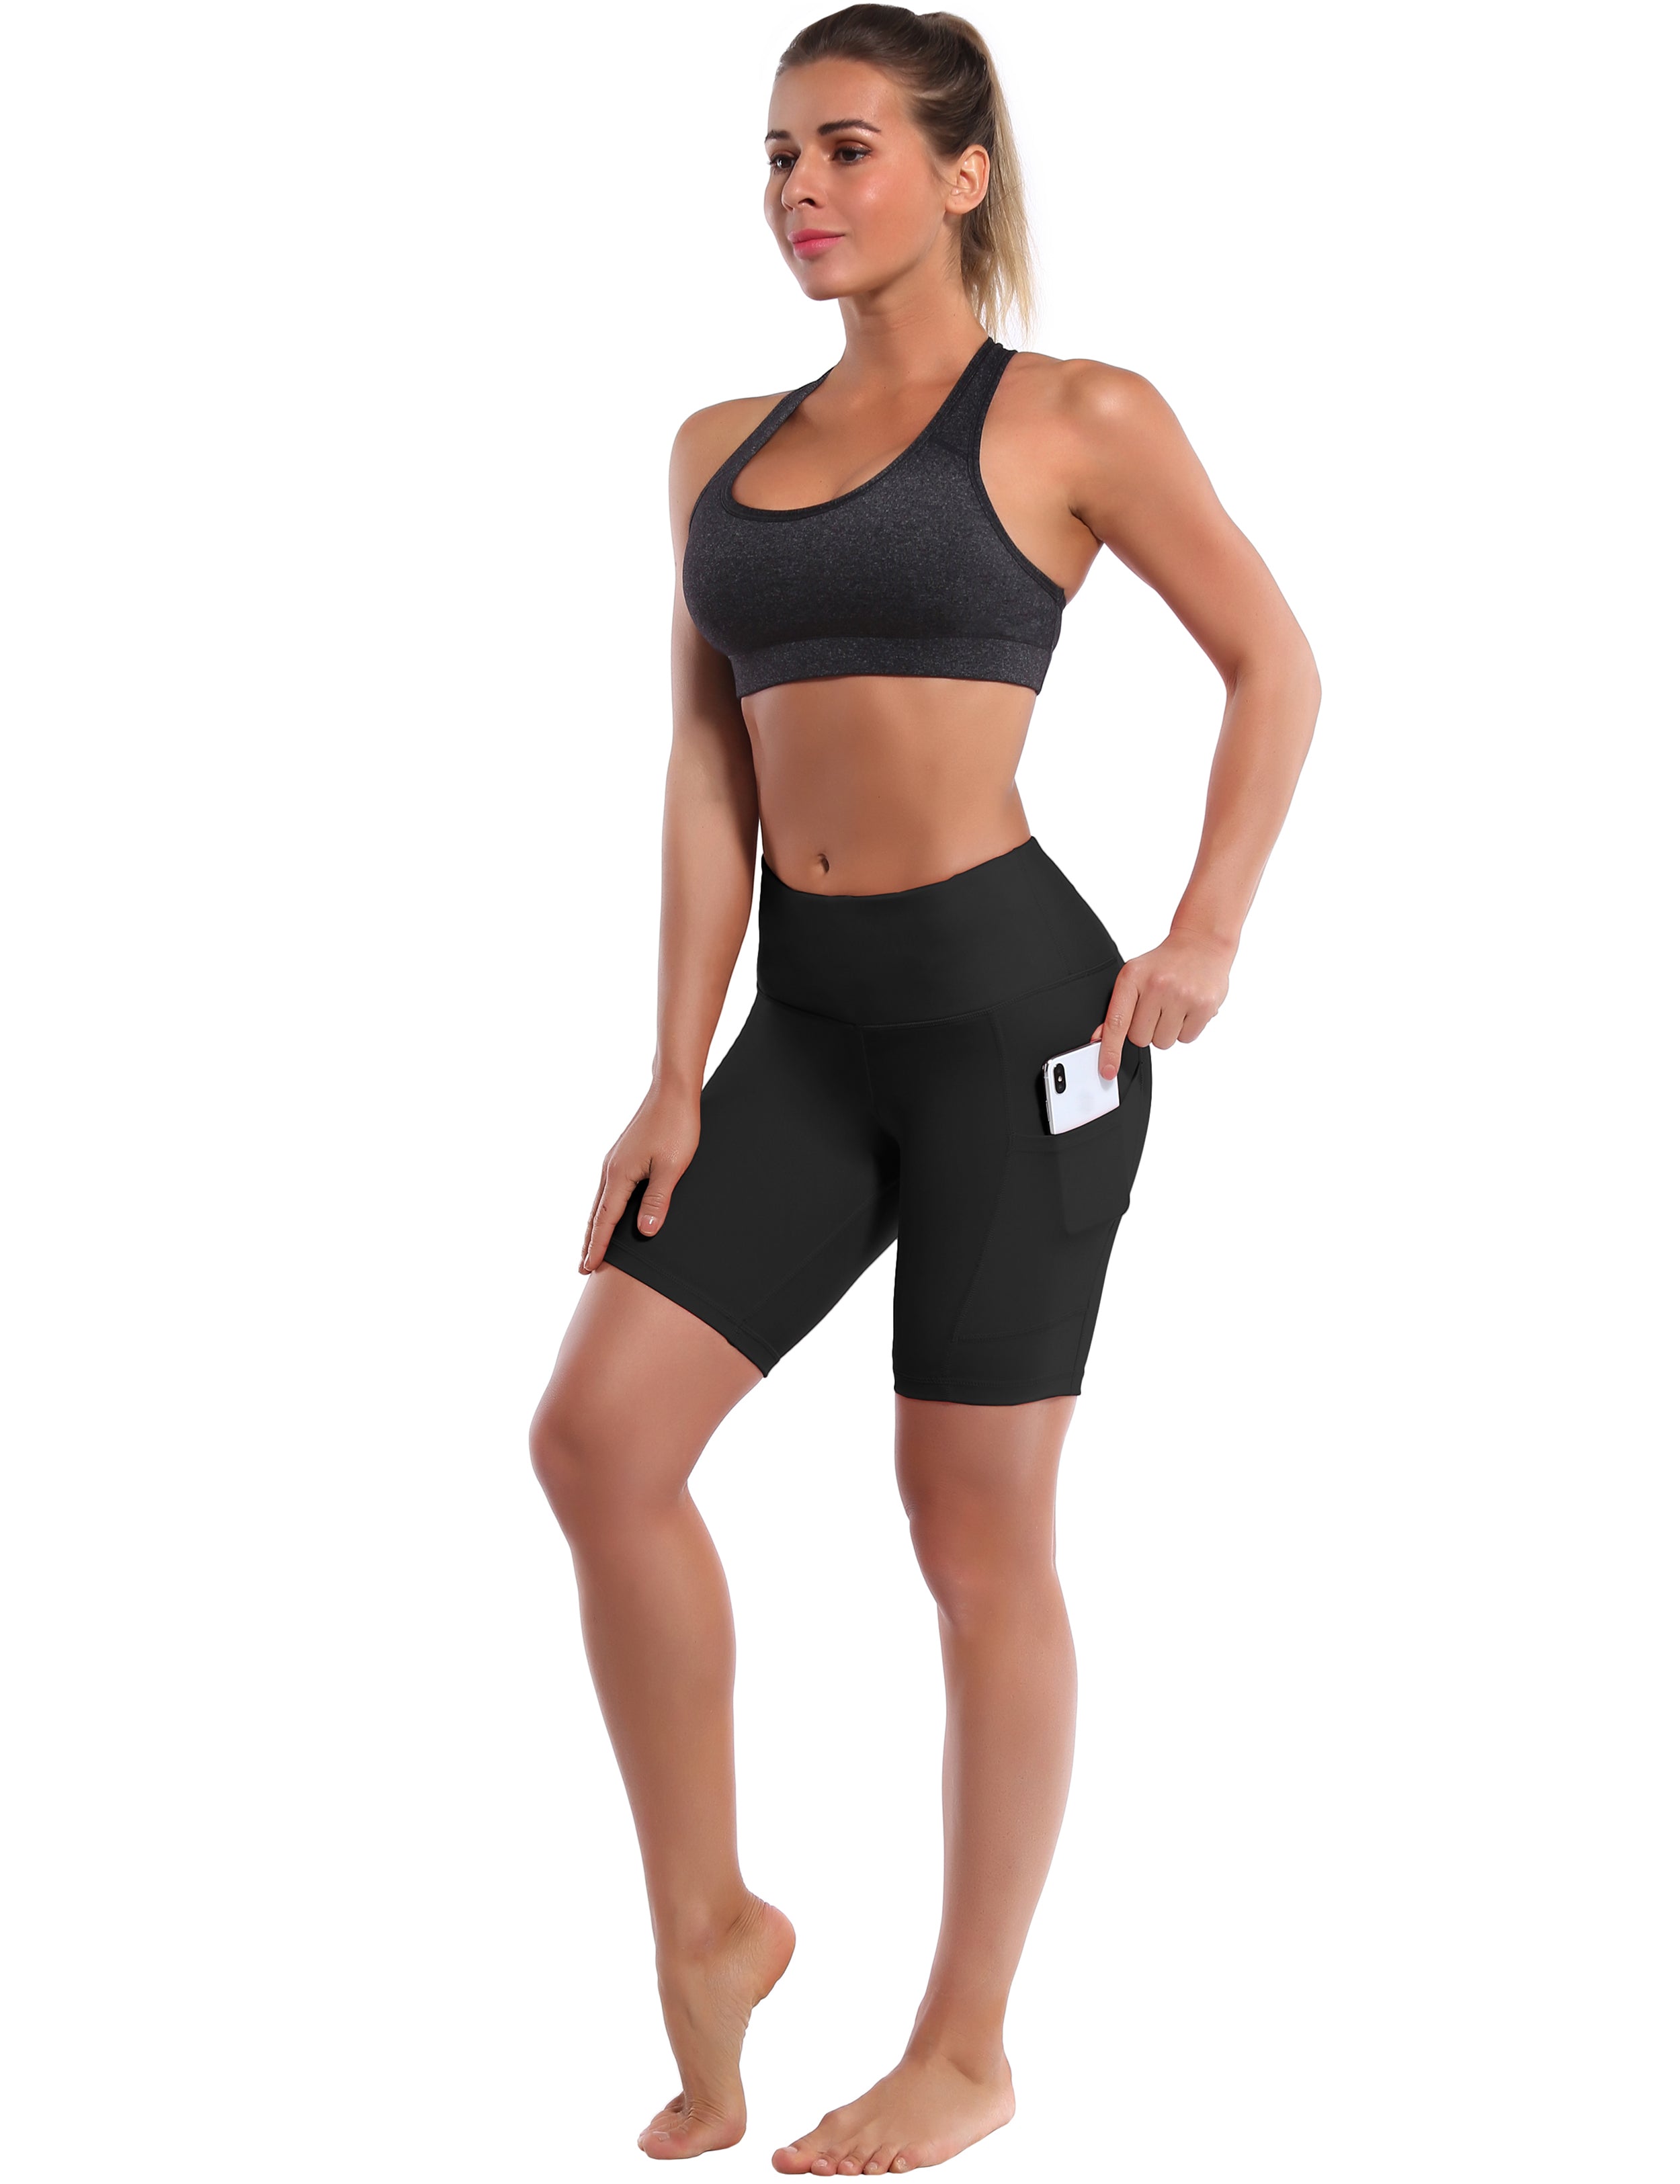 8" Side Pockets Golf Shorts black Sleek, soft, smooth and totally comfortable: our newest style is here. Softest-ever fabric High elasticity High density 4-way stretch Fabric doesn't attract lint easily No see-through Moisture-wicking Machine wash 75% Nylon, 25% Spandex